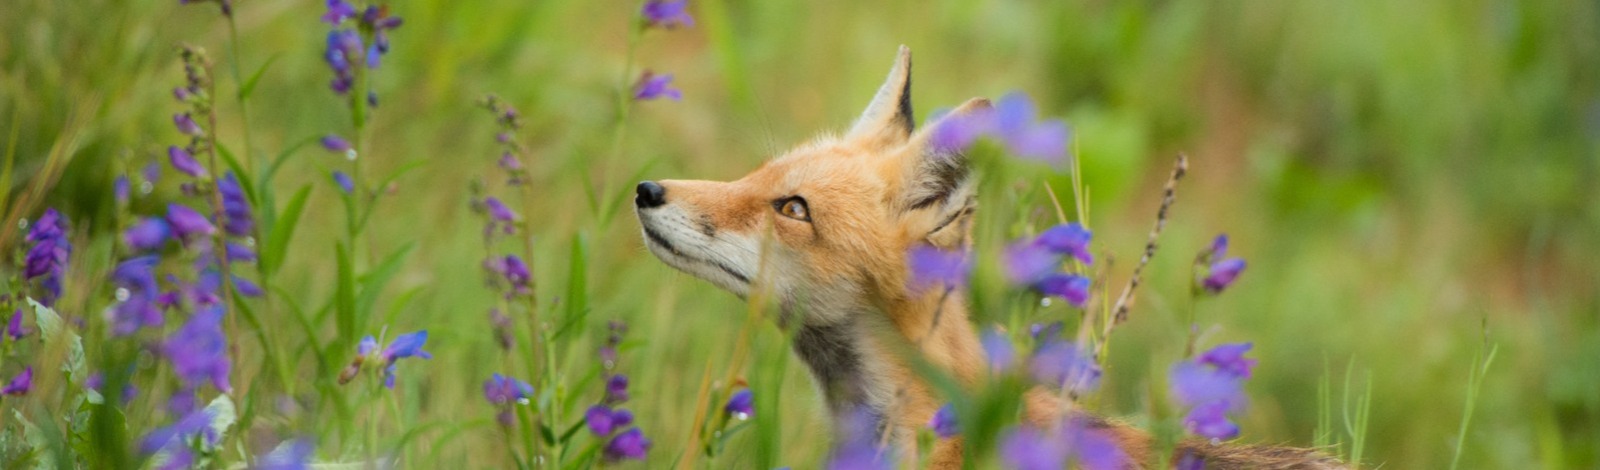 fox surrounded by purple flowers